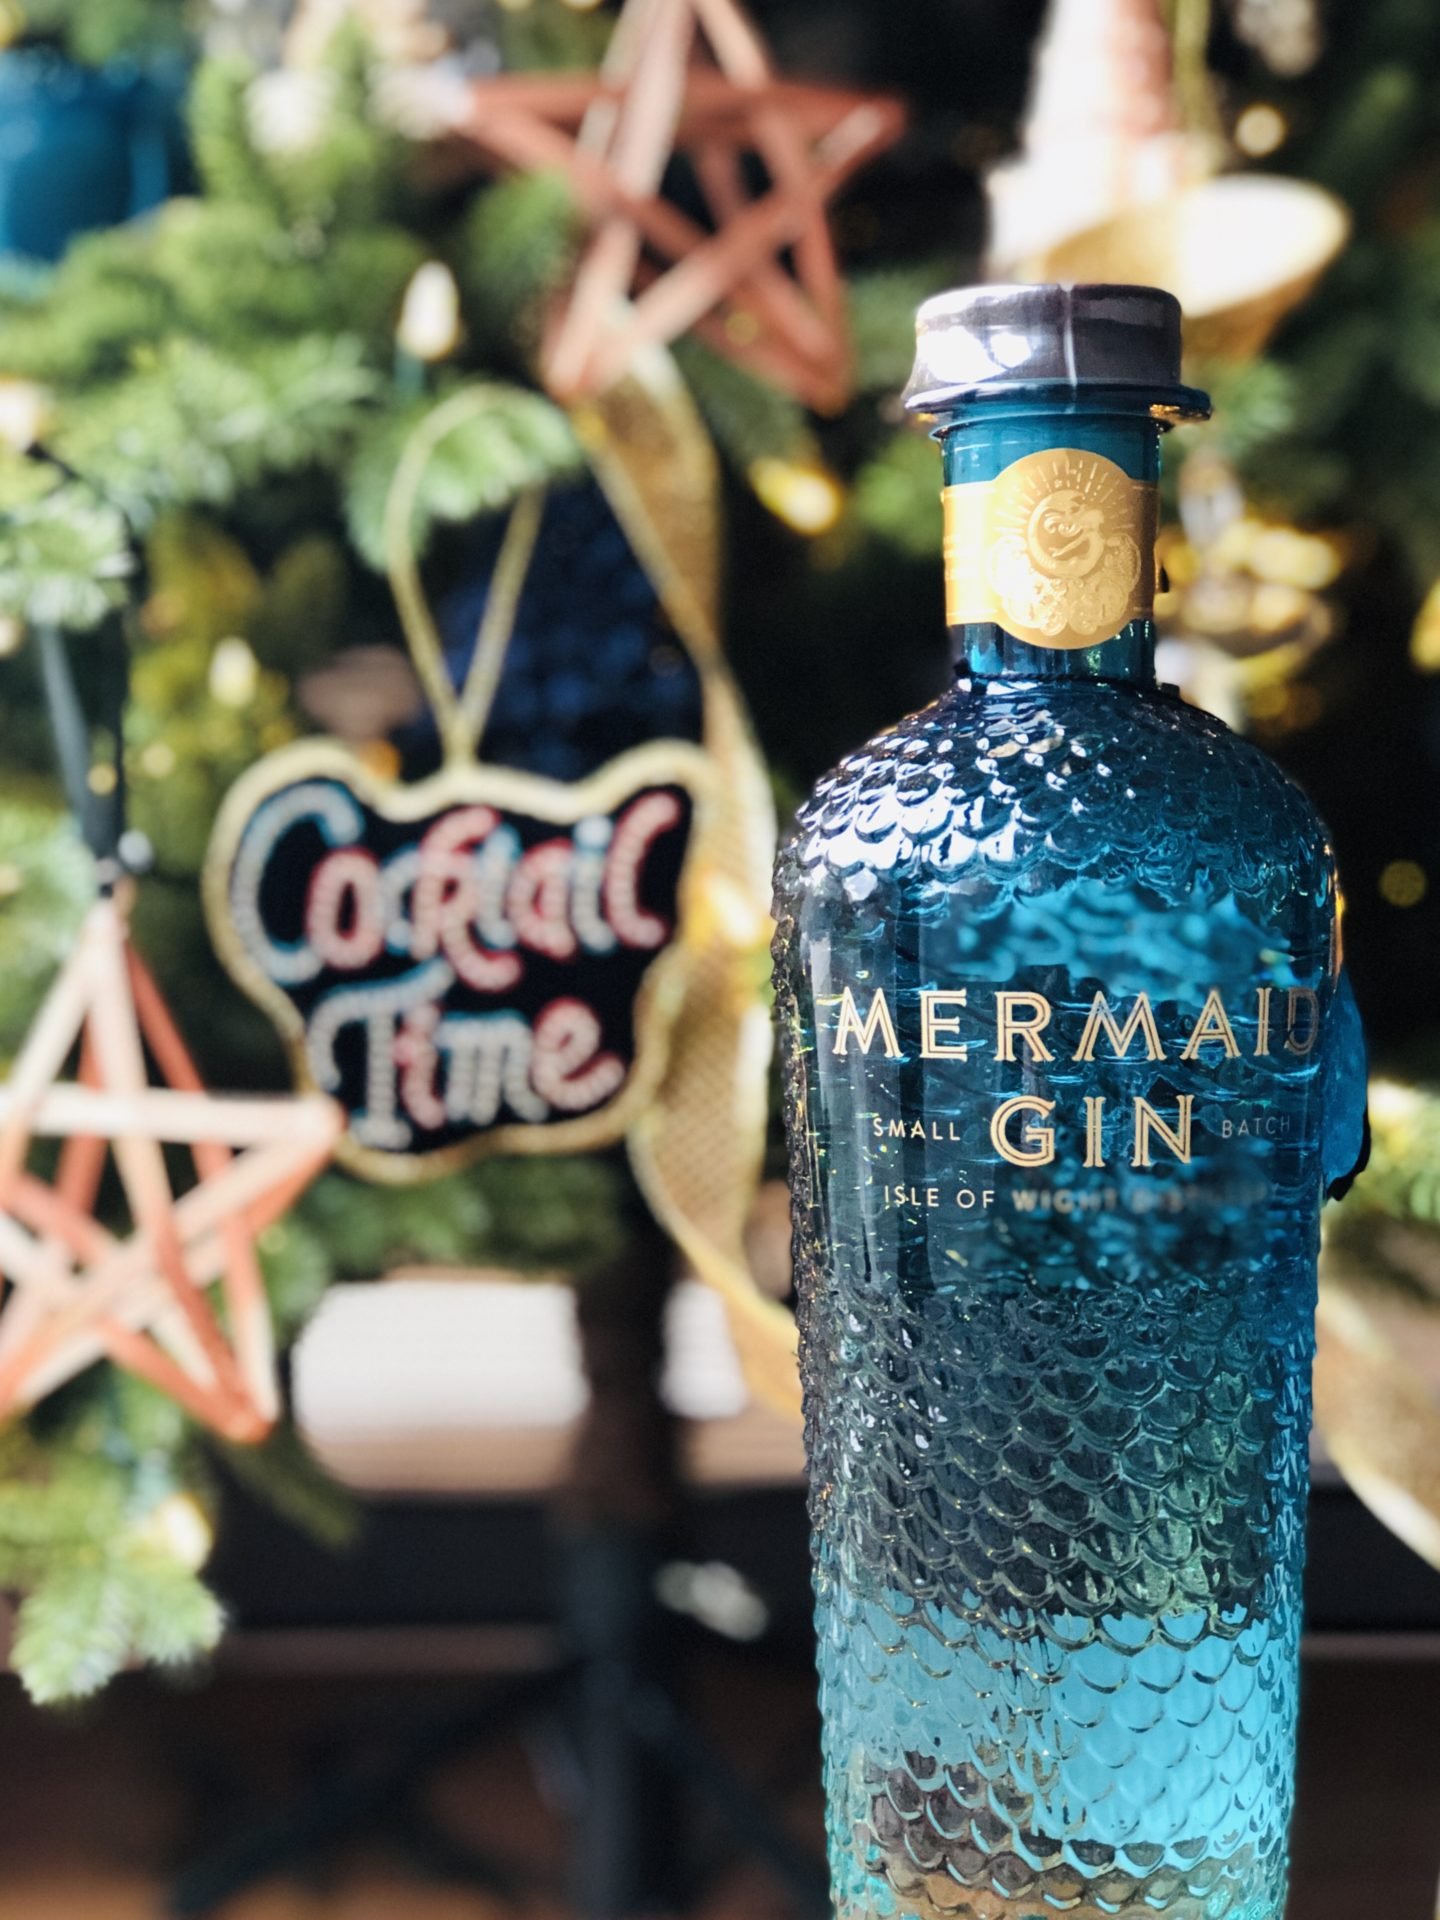 Hand Crafted Gin from the Isle of Wight mermaid gin 